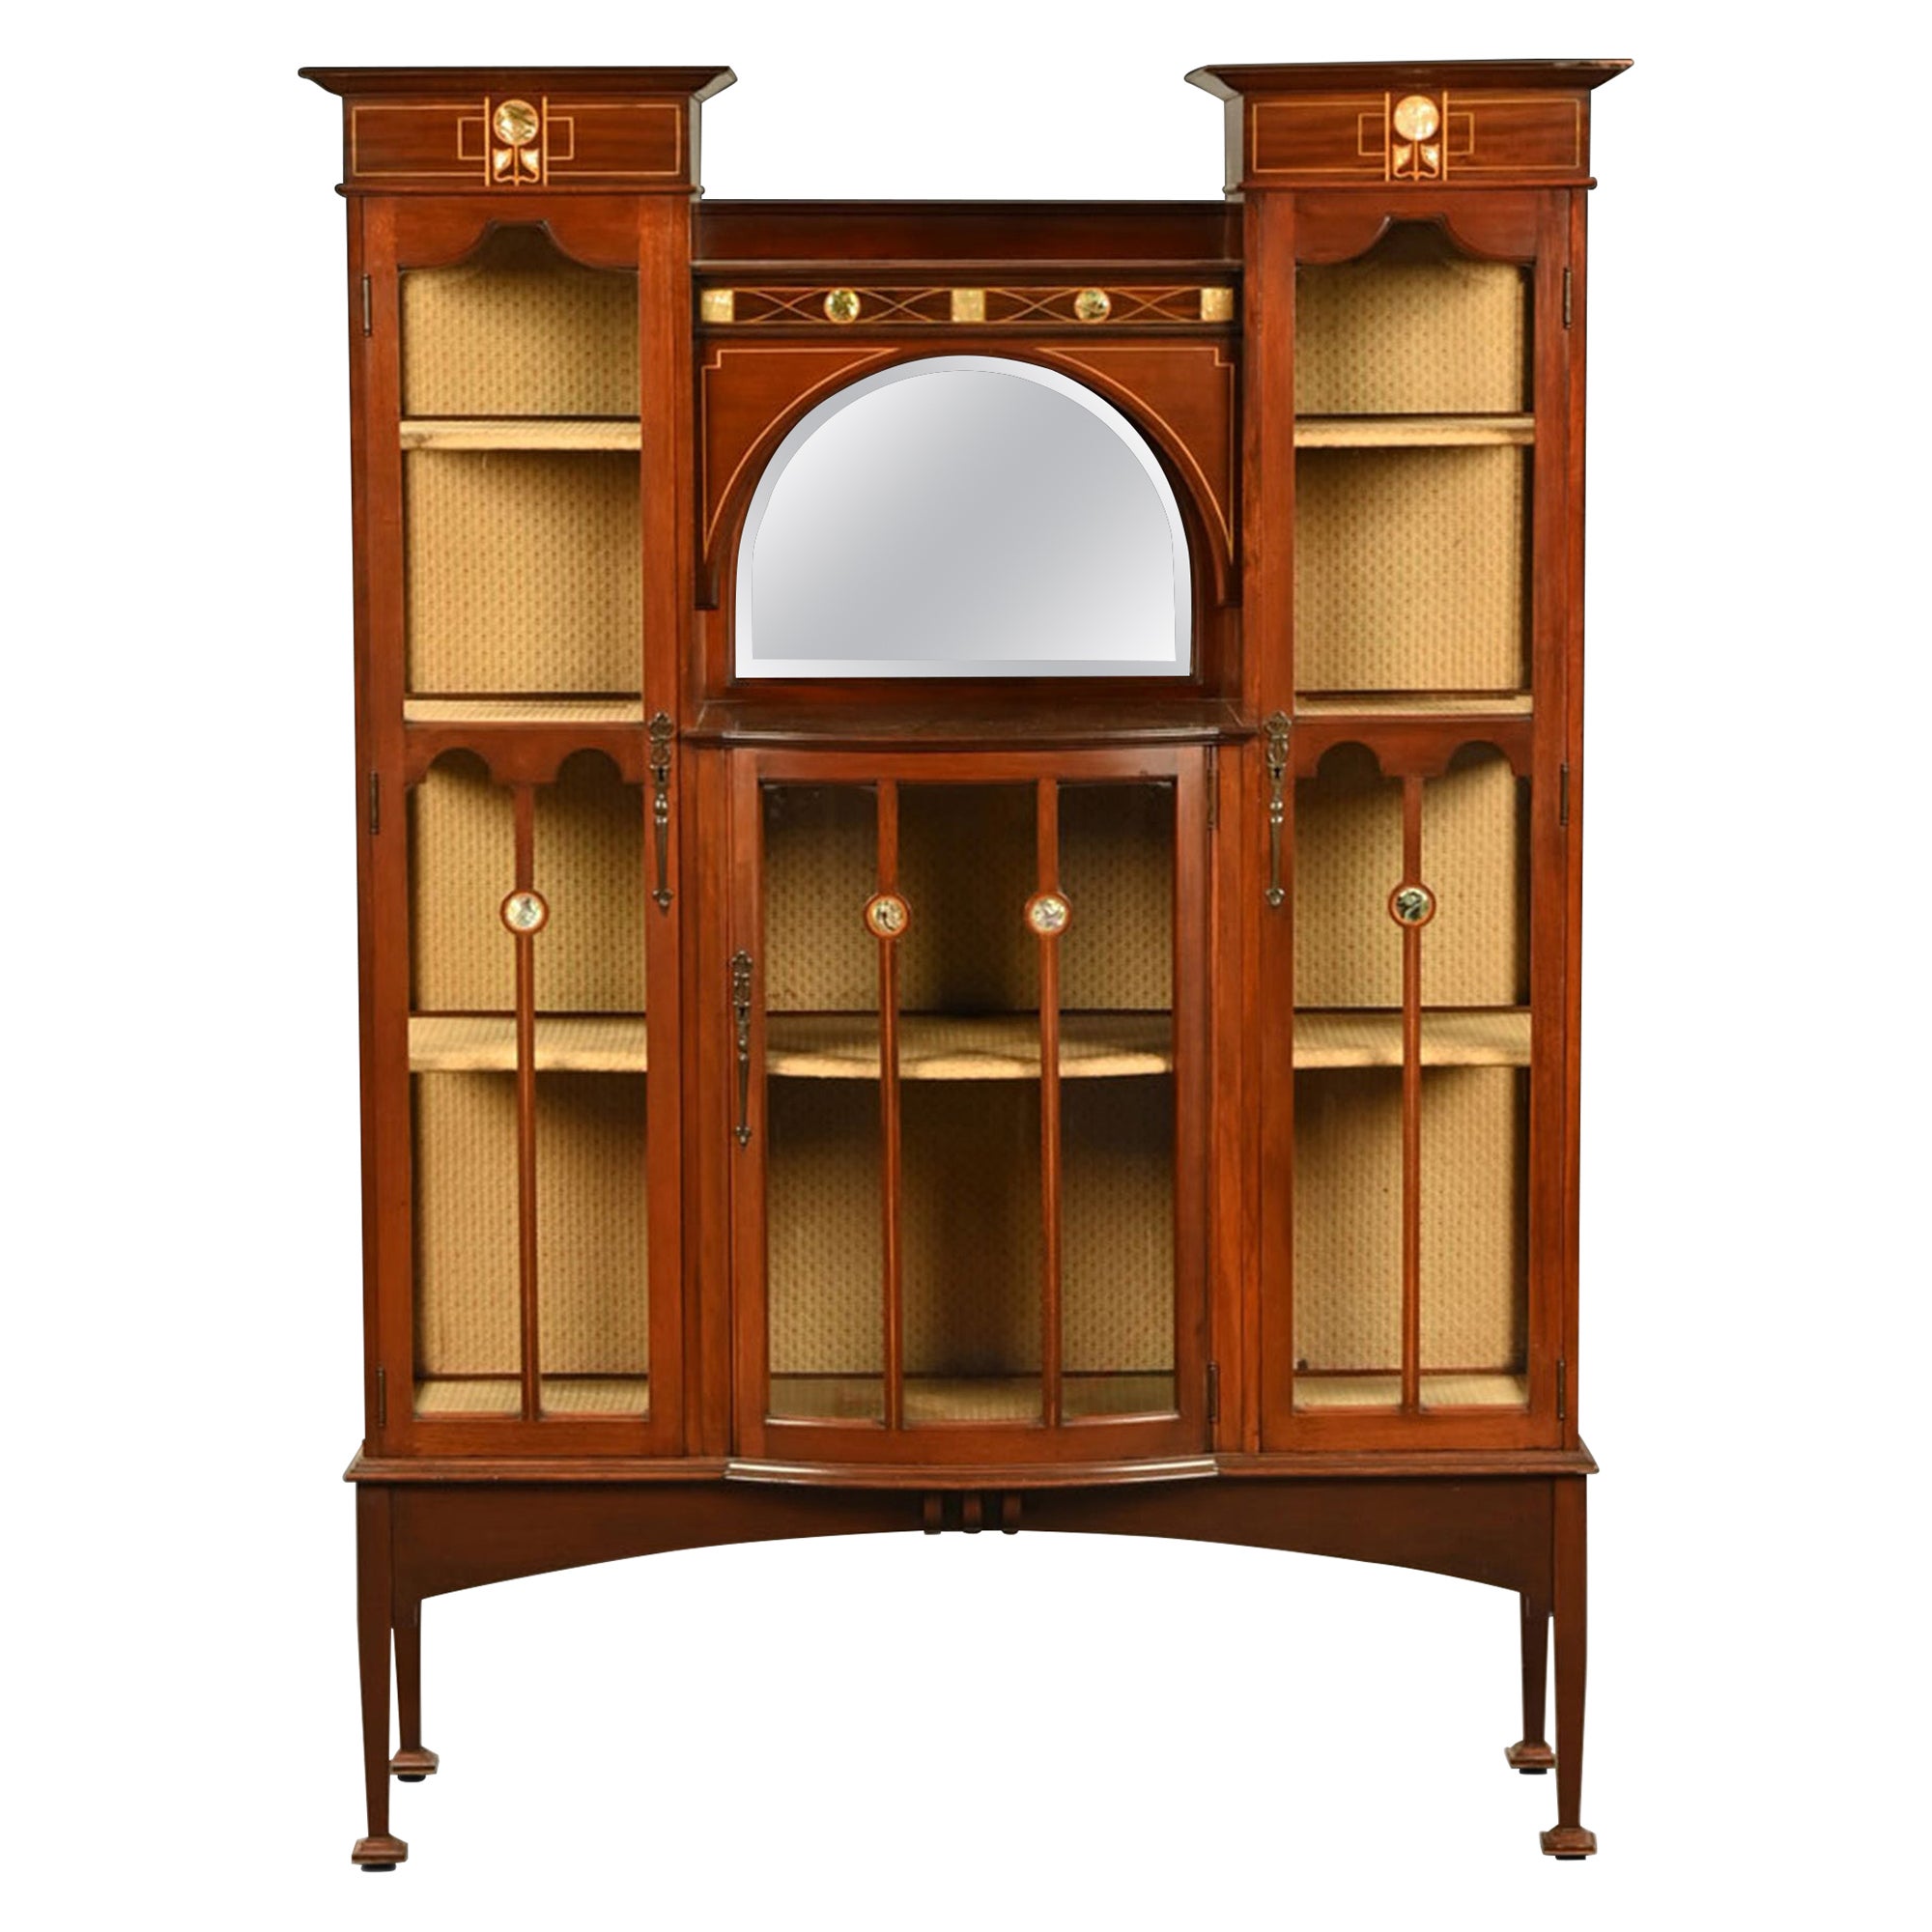 Shapland & Petter Edwardian Mother of Pearl Inlaid Mahogany Display Cabinet For Sale